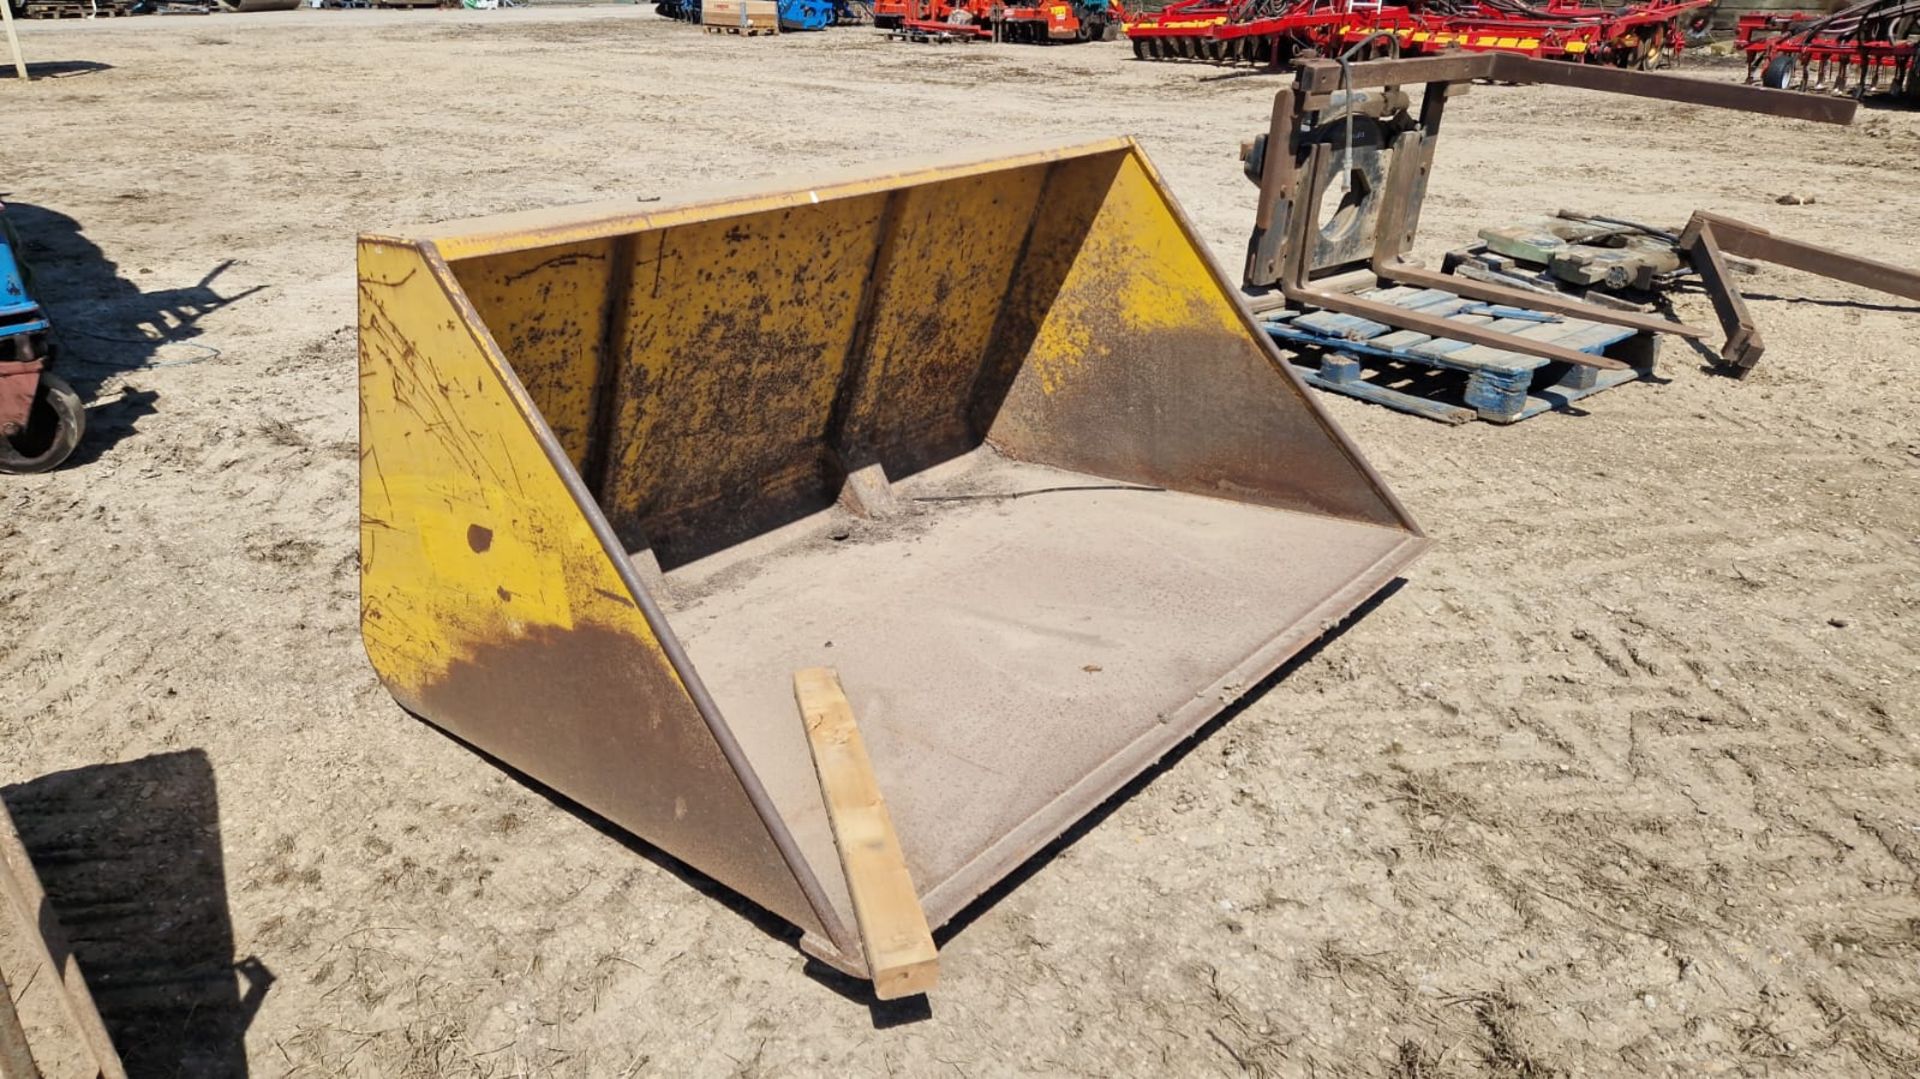 Bridge Engineering materials handling bucket to fit carriage on forklift